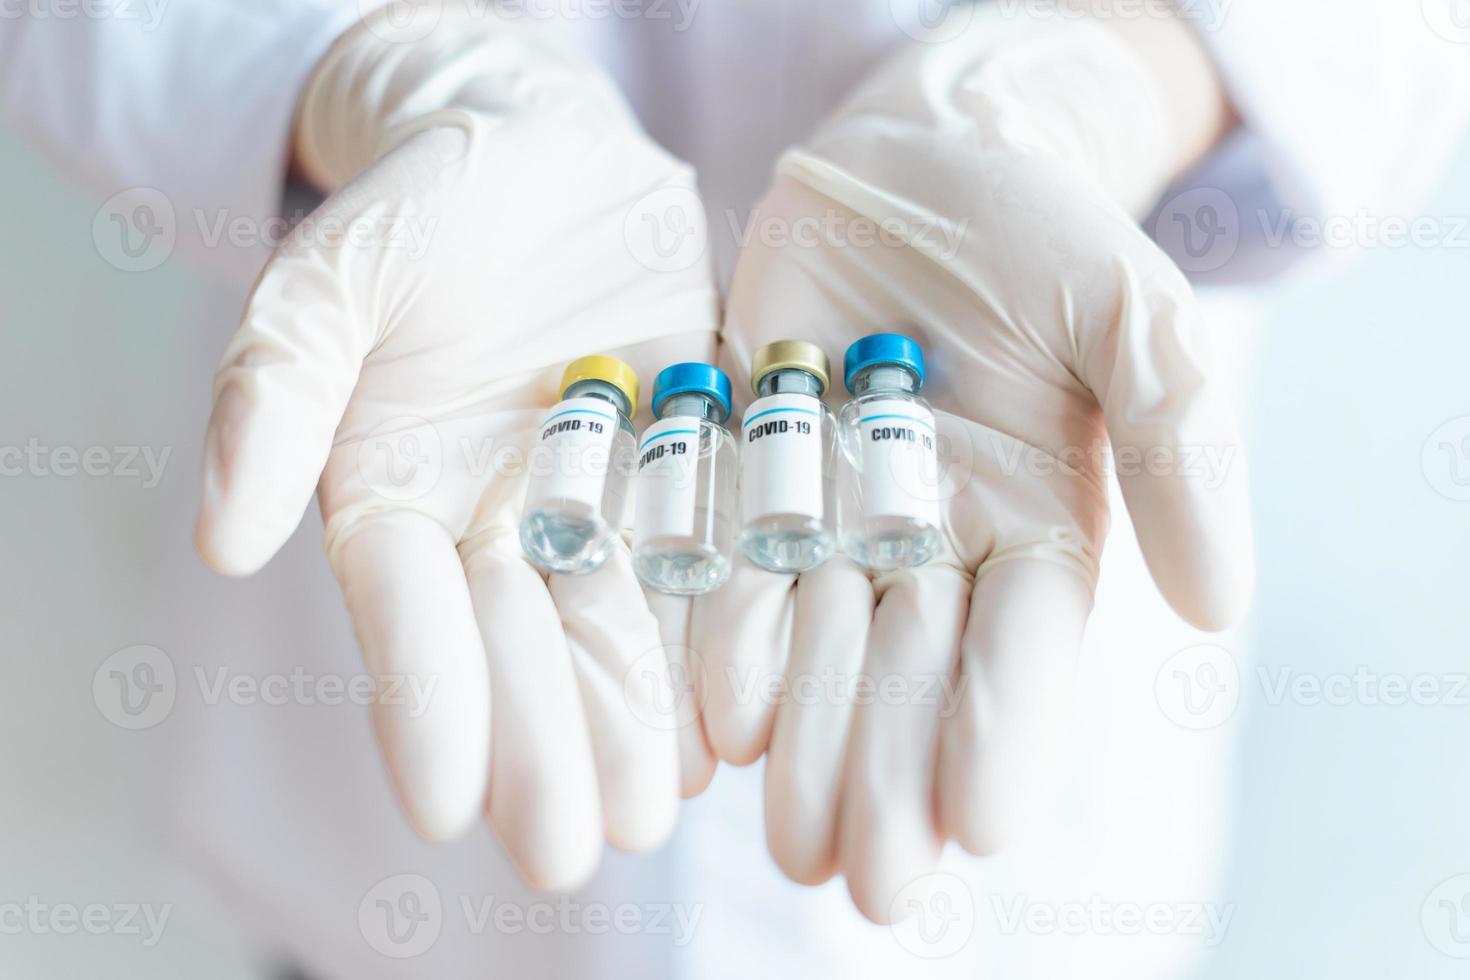 image of vaccine vials in the hands of female nurses photo